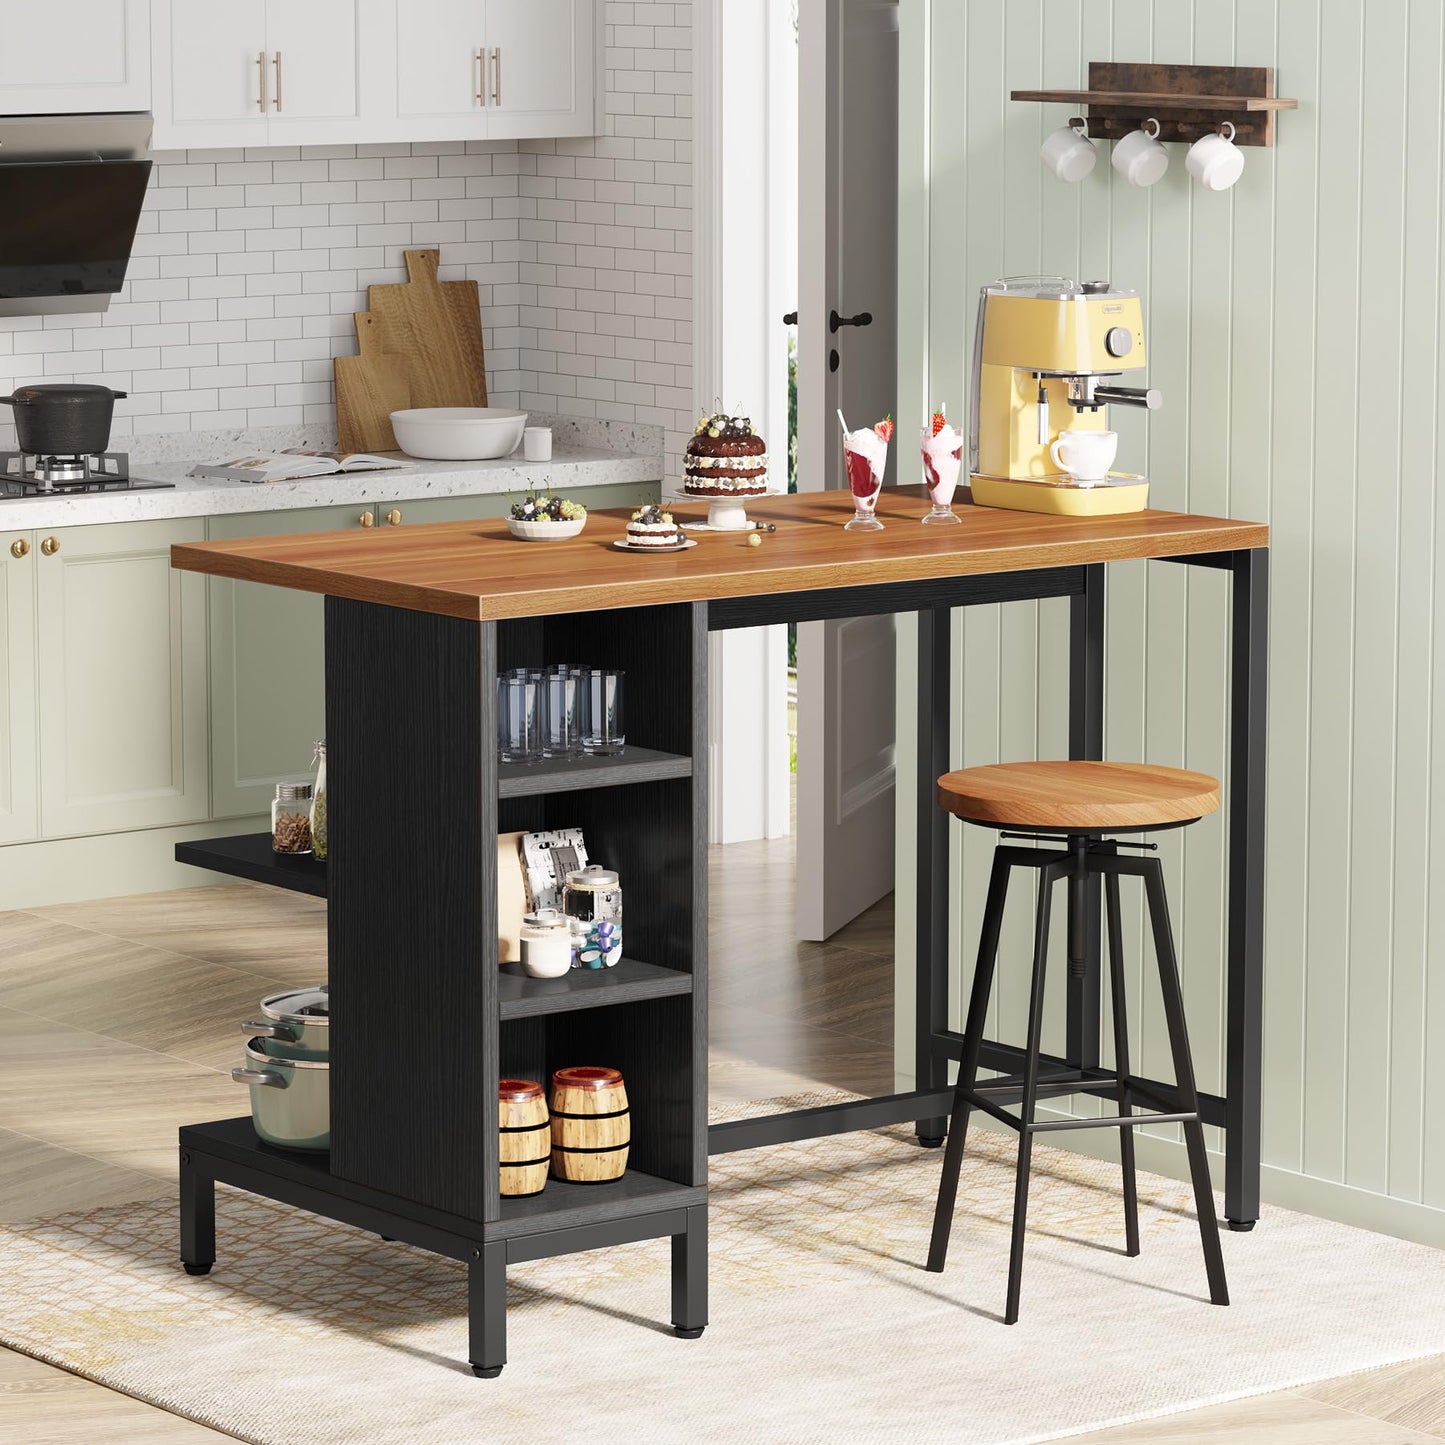 Tribesigns Kitchen Island with Shelves, 43 Inch Kitchen Shelf Kitchen Prep Table with 5 Open Storage Shelves and Large Worktop, Industrial Butcher Block Island, Dark Walnut (Stools Not Included)